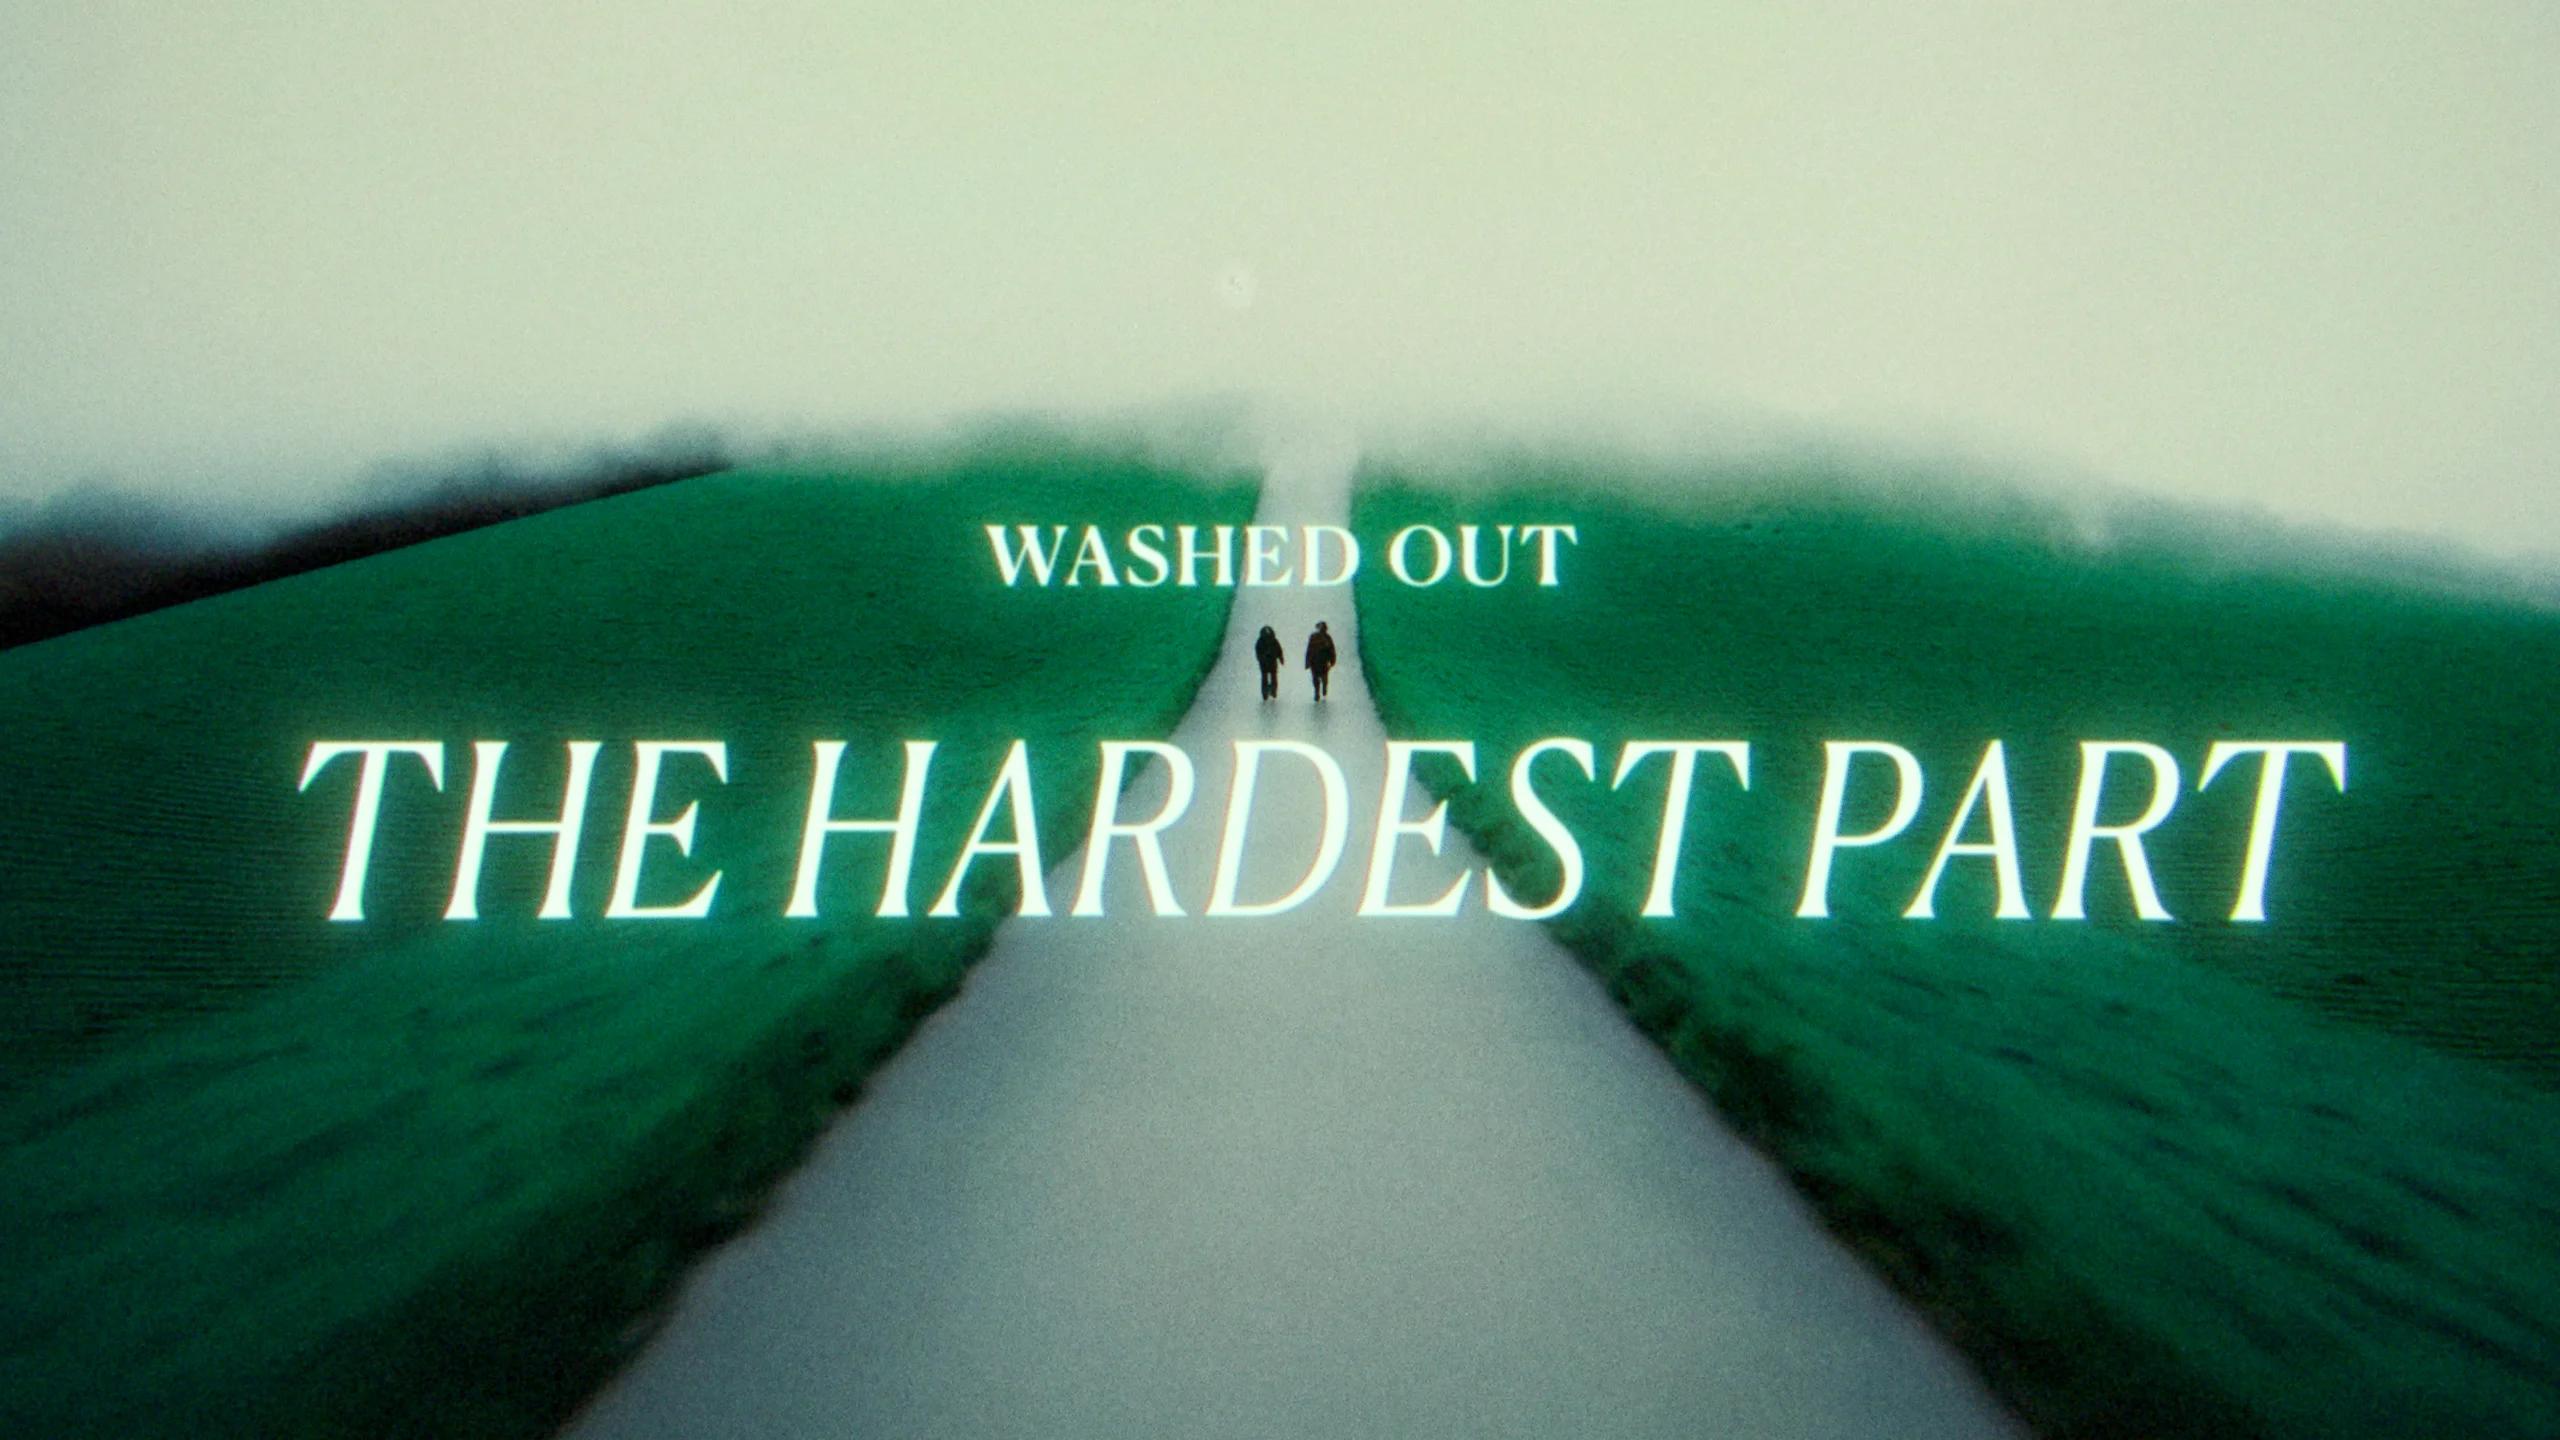 Washed Out “The Hardest Part” on Vimeo [Video]